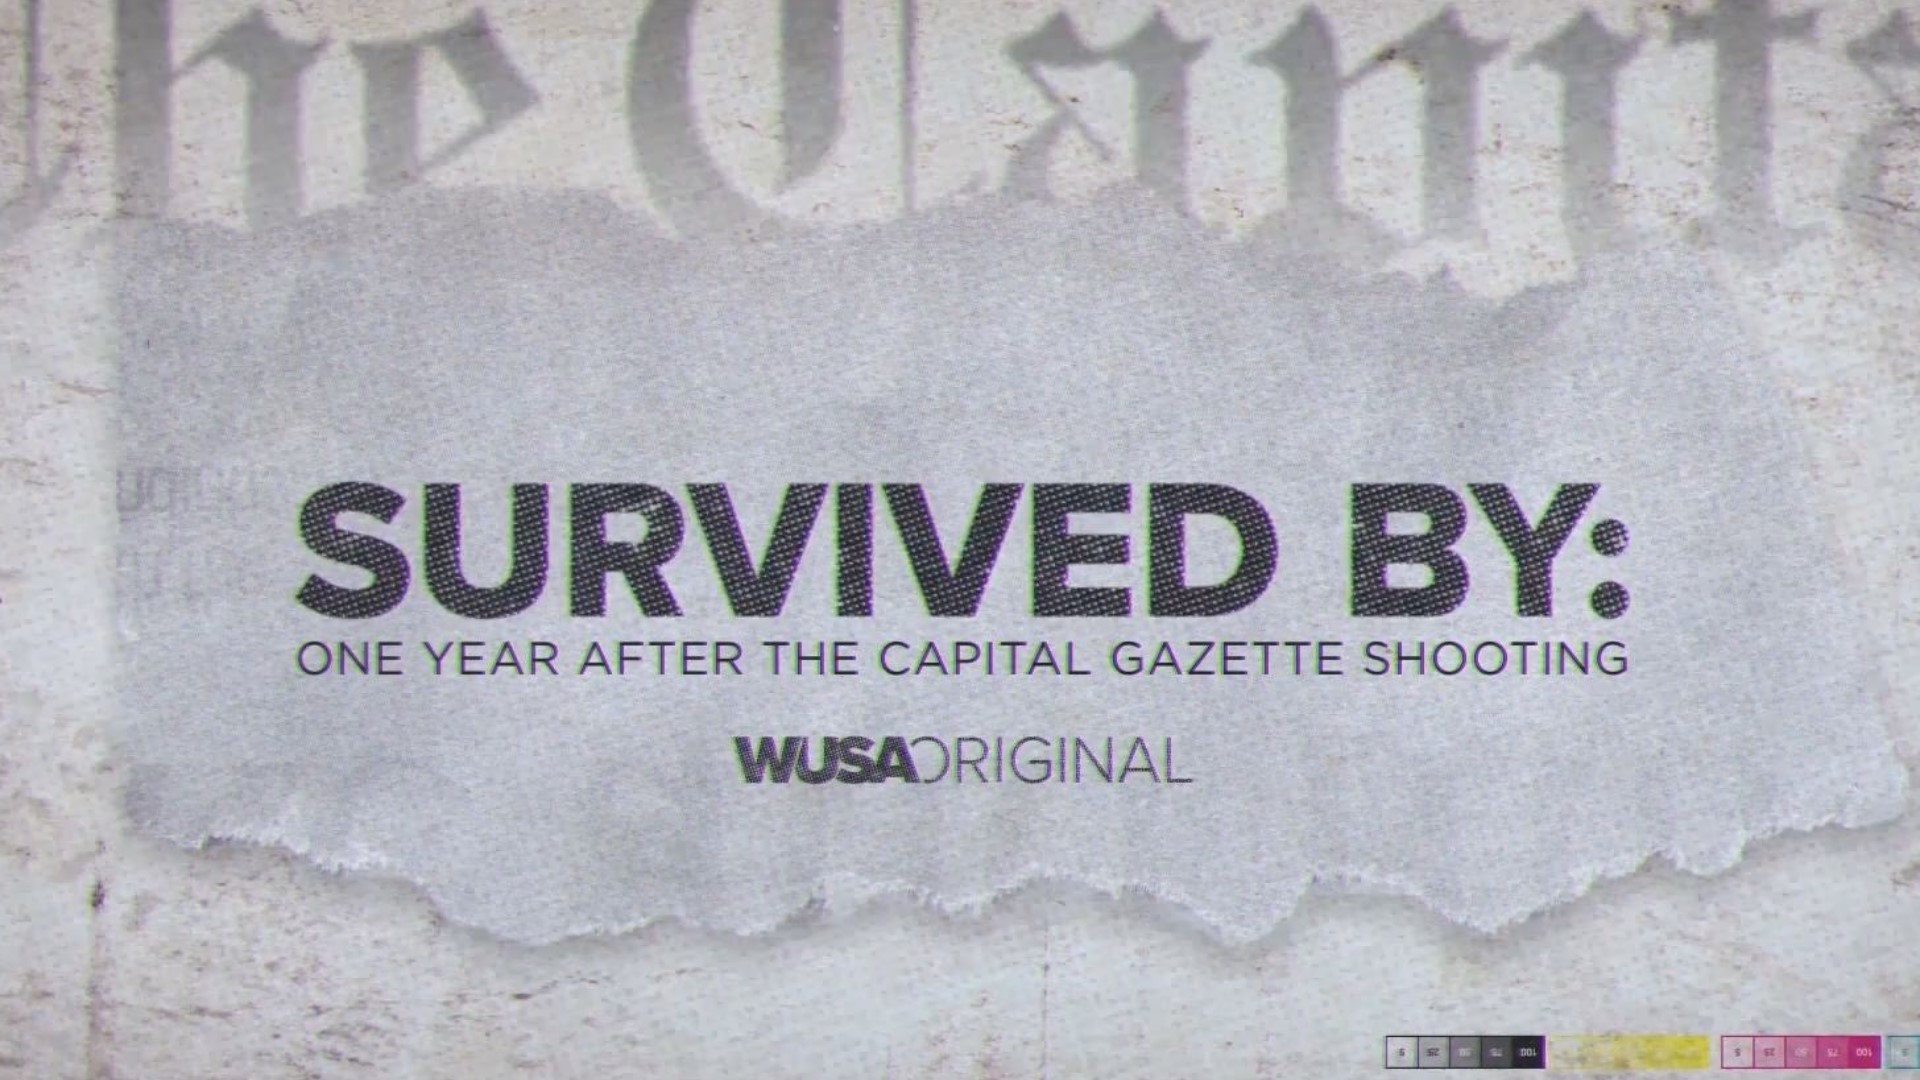 On June 28, 2018, 5 employees of the Annapolis Capital Gazette were killed in a mass shooting. We detail how survivors spent the past year navigating their grief.